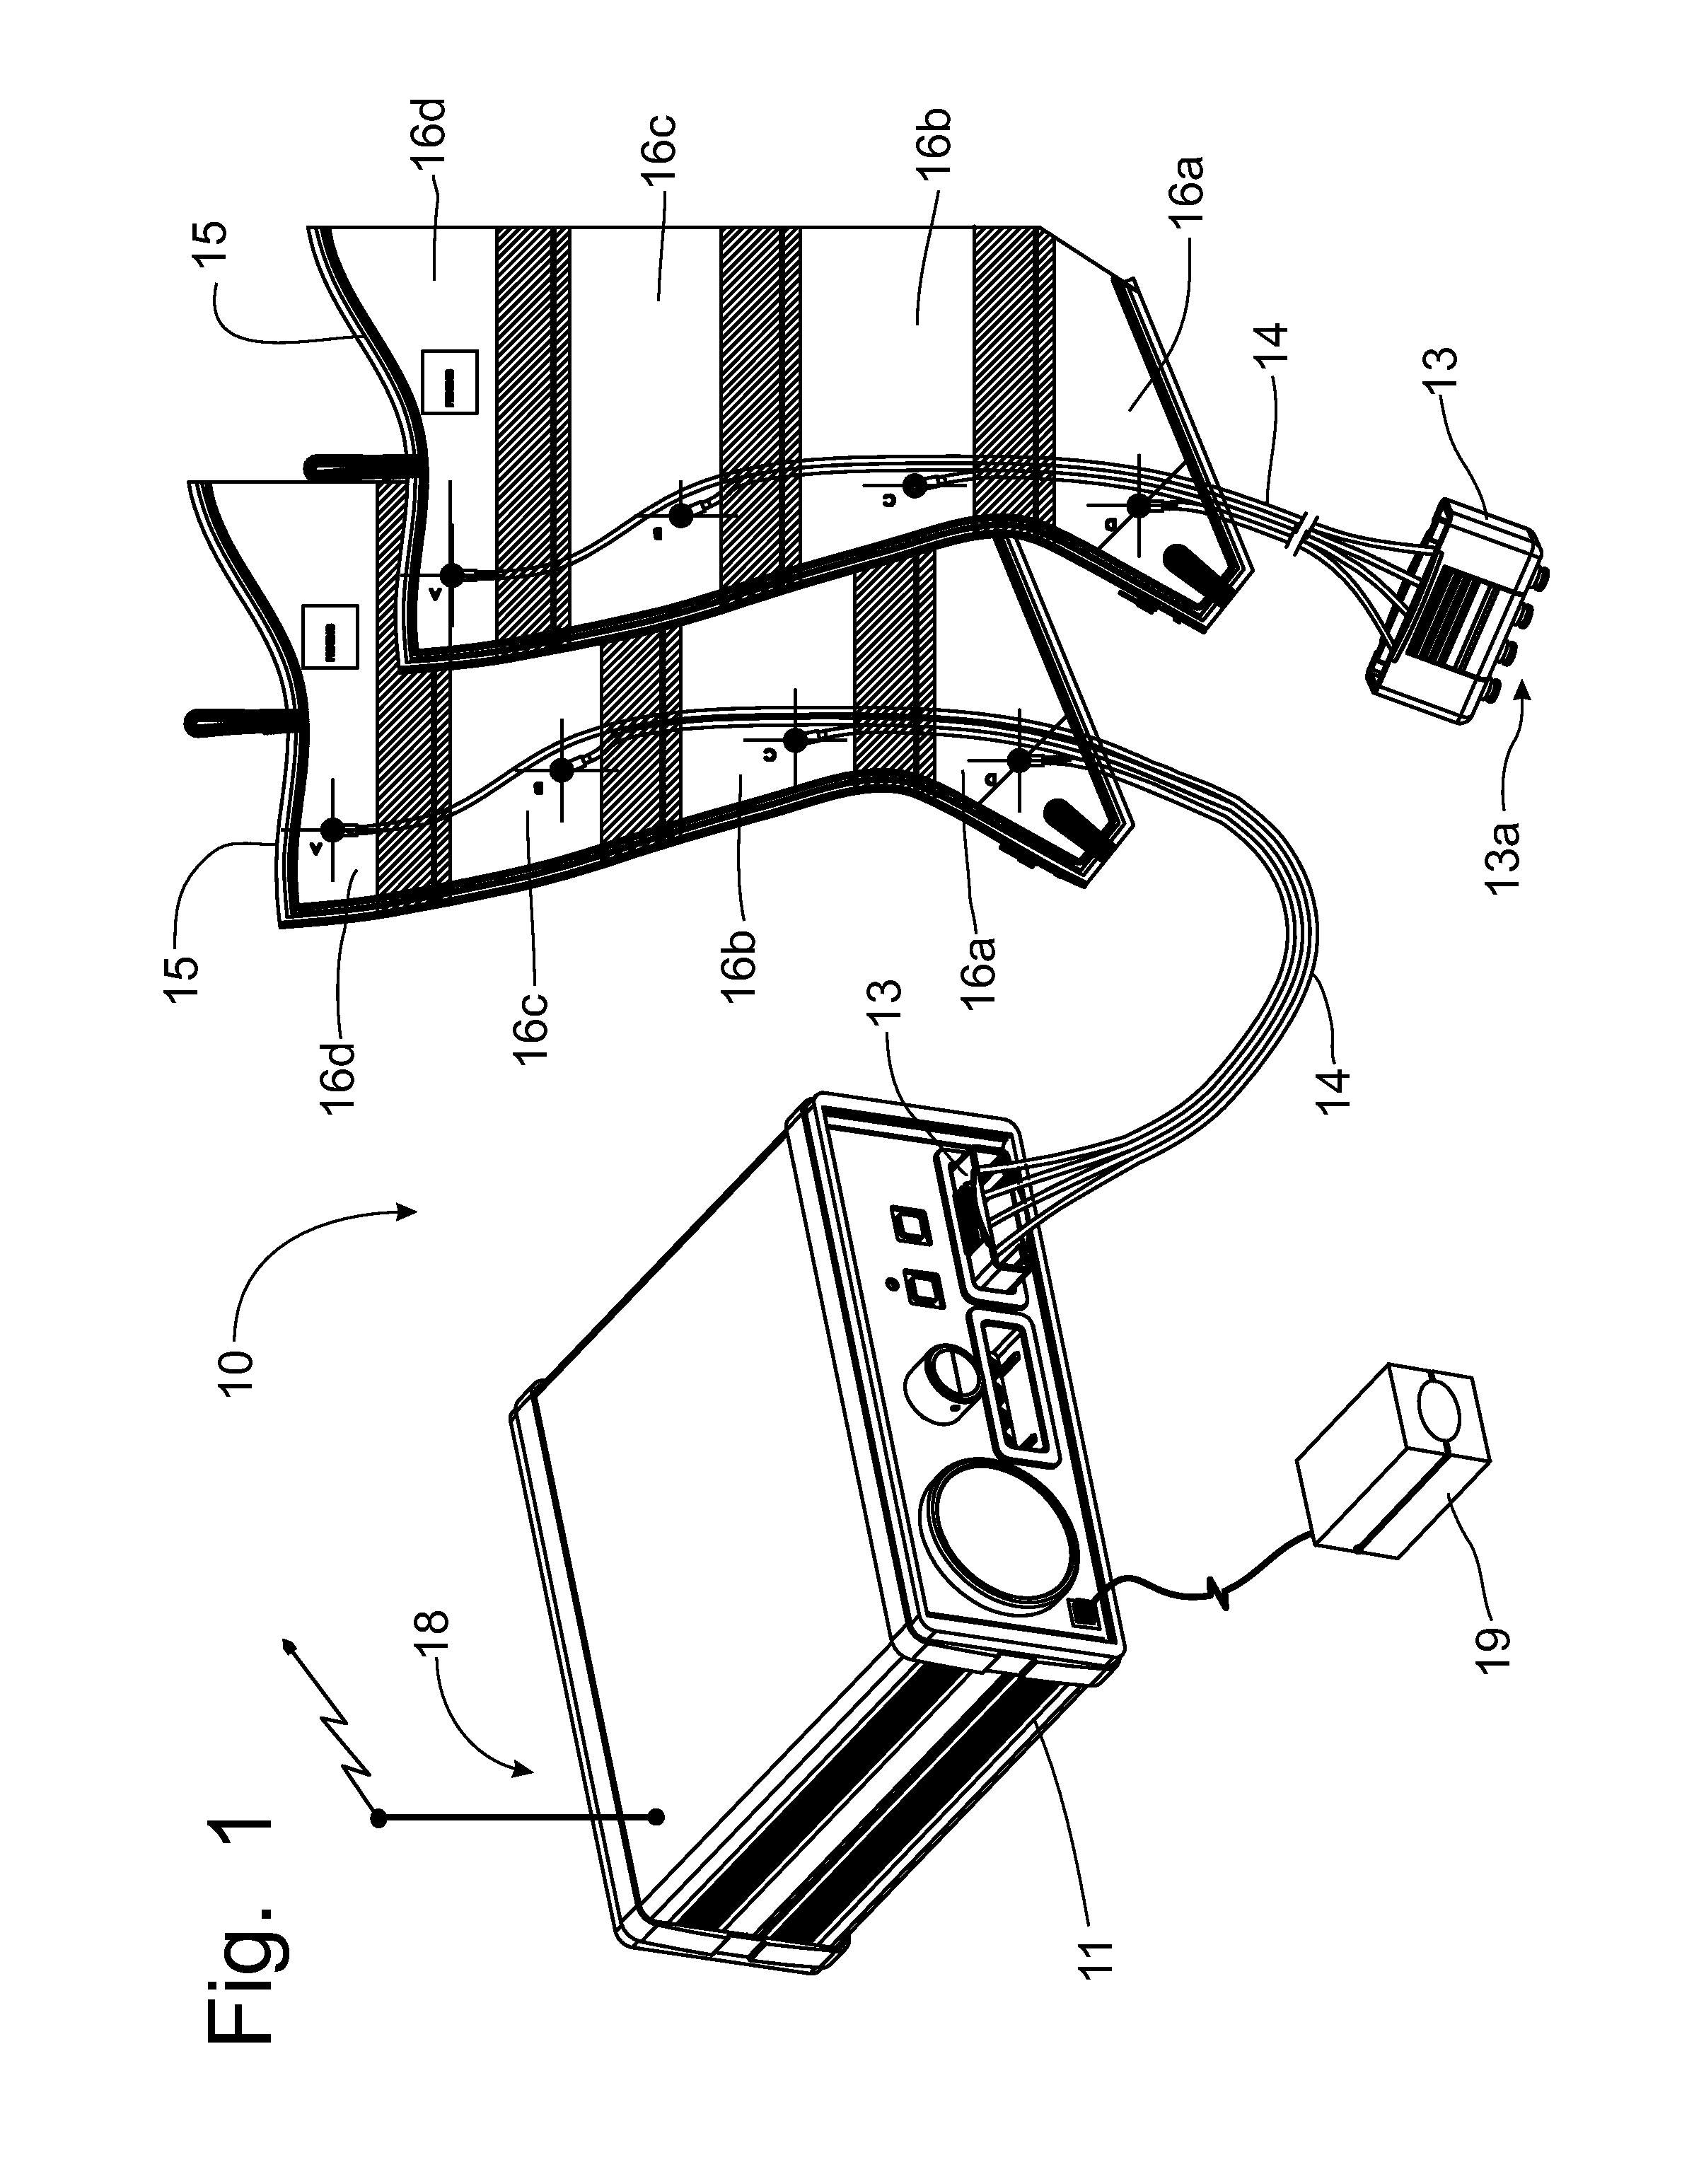 System for monitoring the use of medical devices